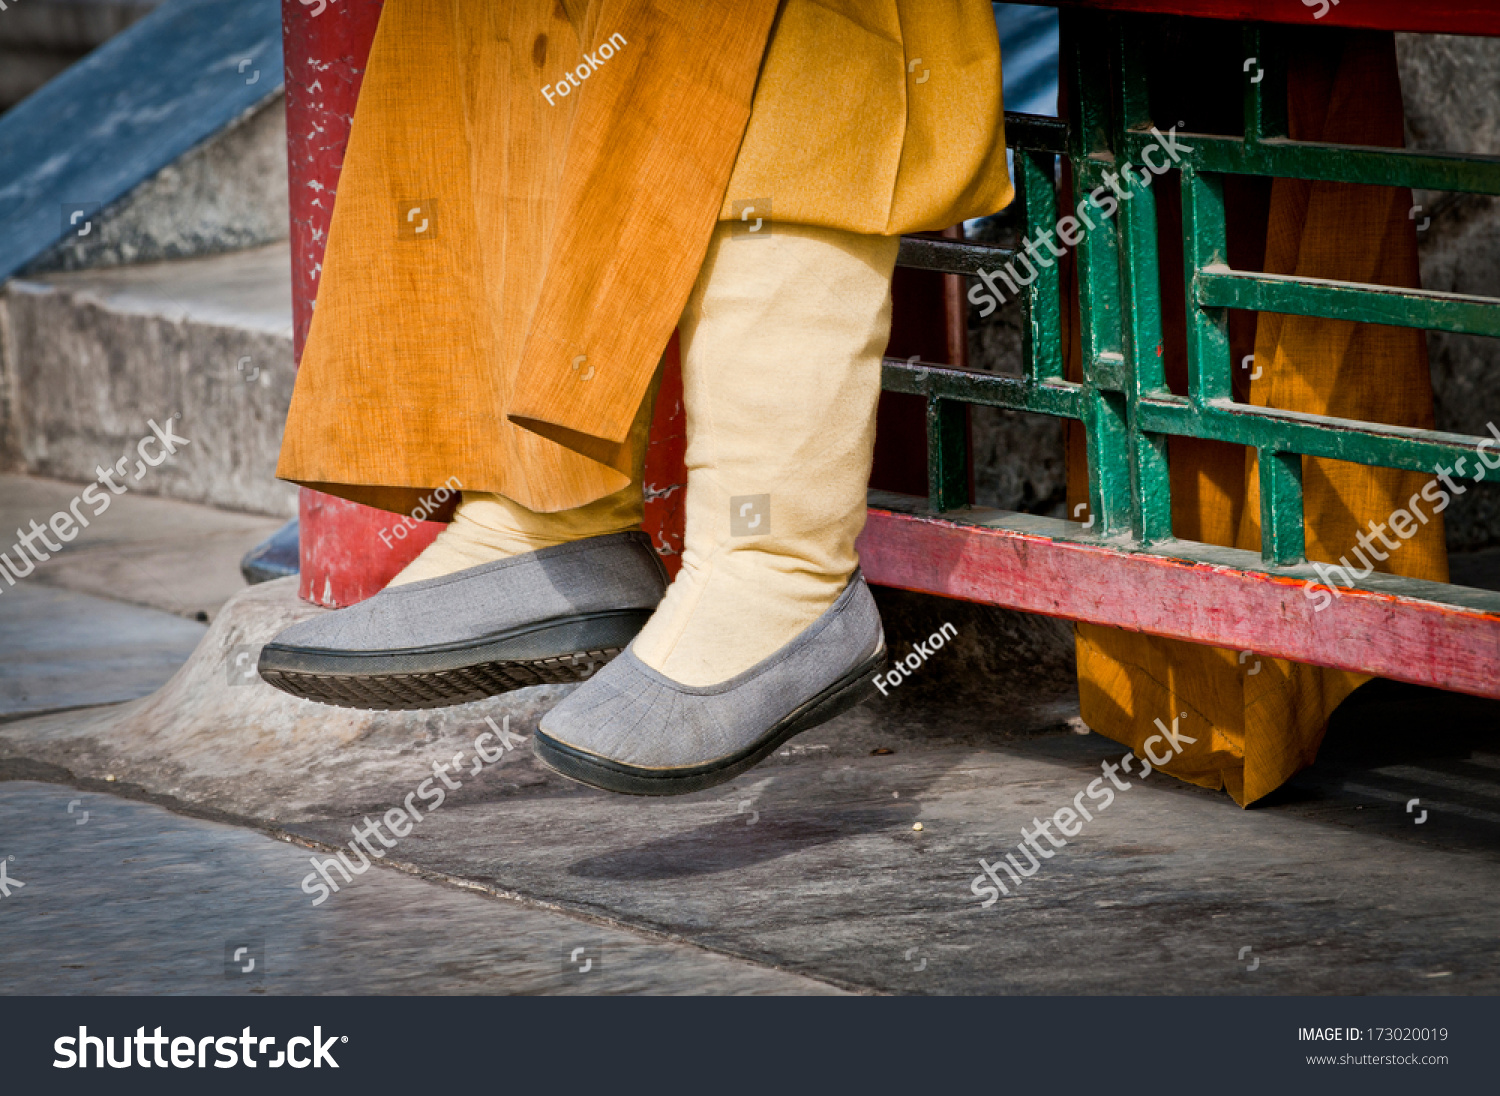 On Buddhist Monks Shoes Stock Photo 